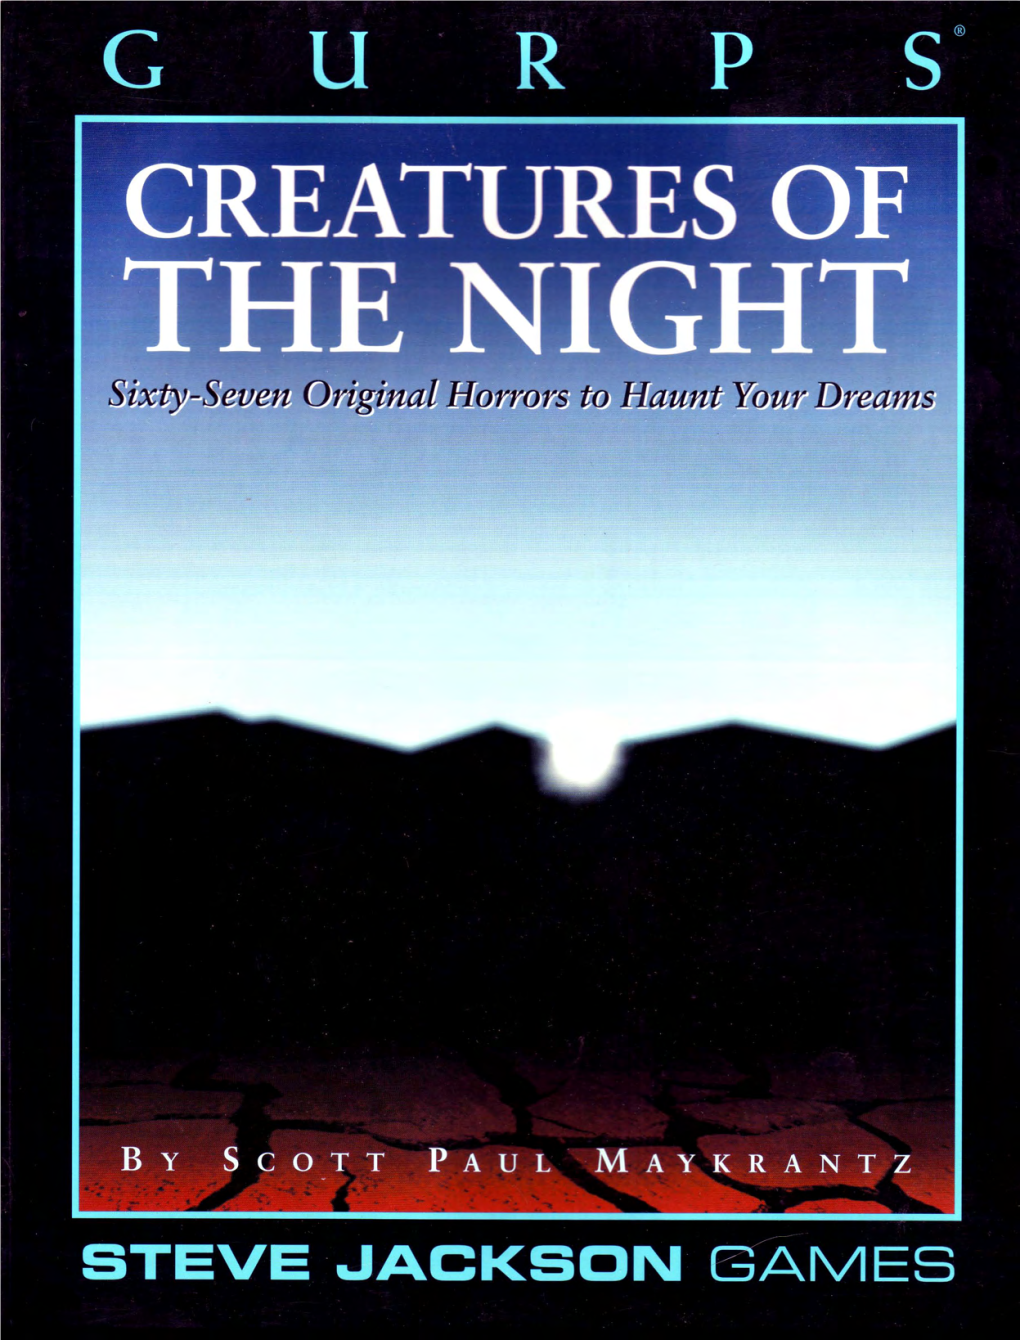 GURPS Classic Creatures of the Night